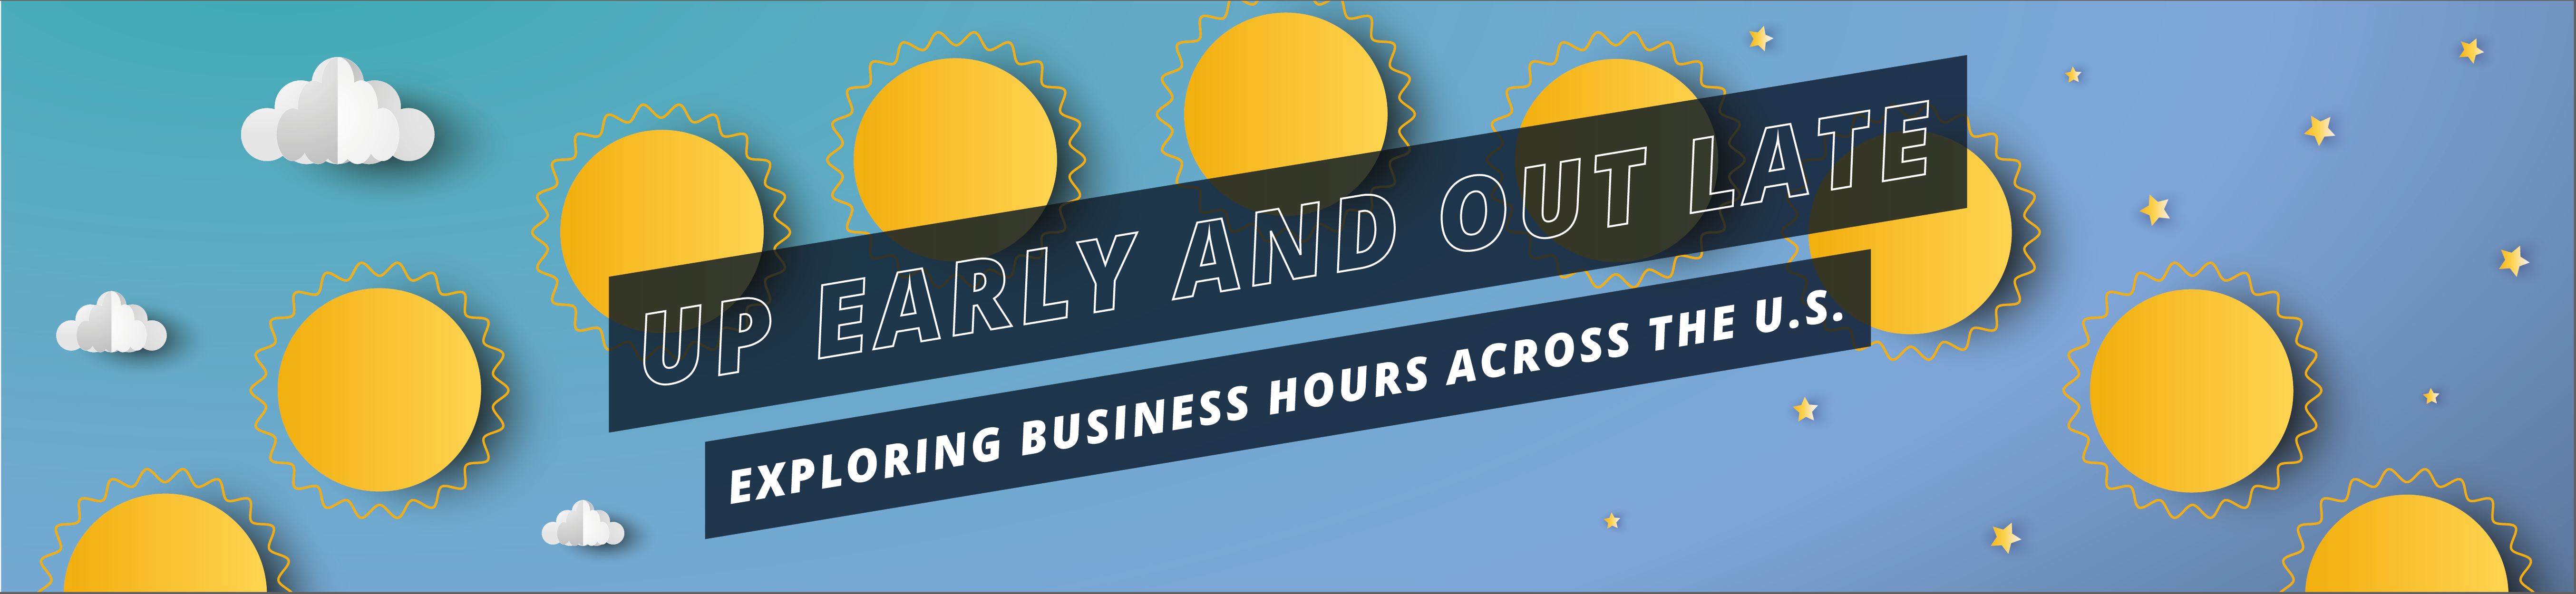 Up Early and Out Late: Exploring Business Hours Across the U.S.